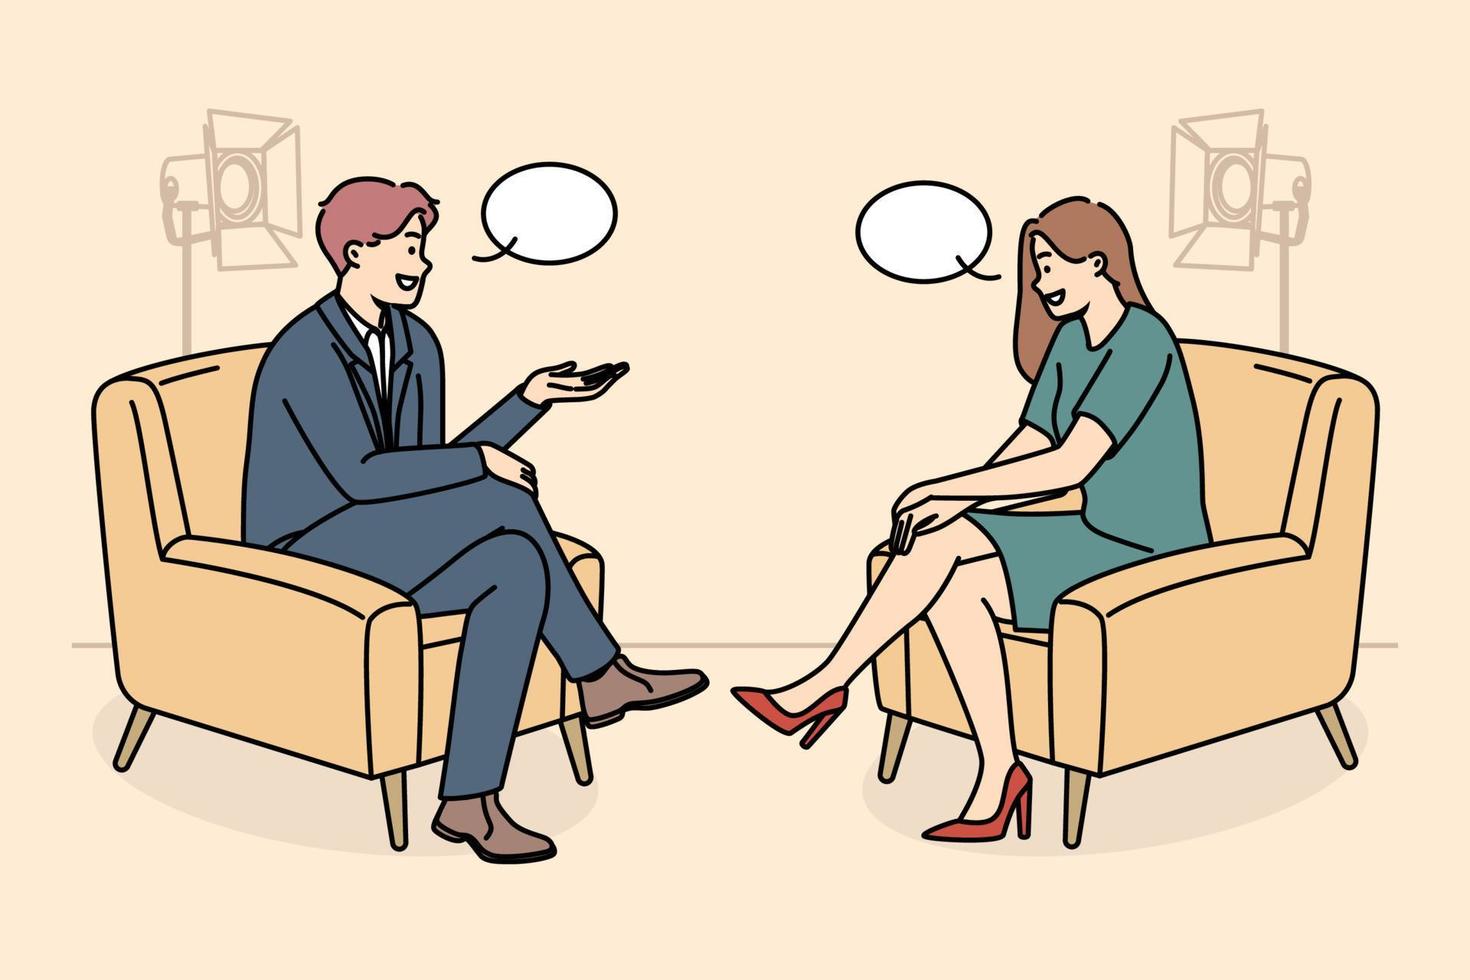 Smiling people sitting in chairs in studio filming TV program. Happy interviewer and interviewee have discussion shooting live broadcast. Vector illustration.